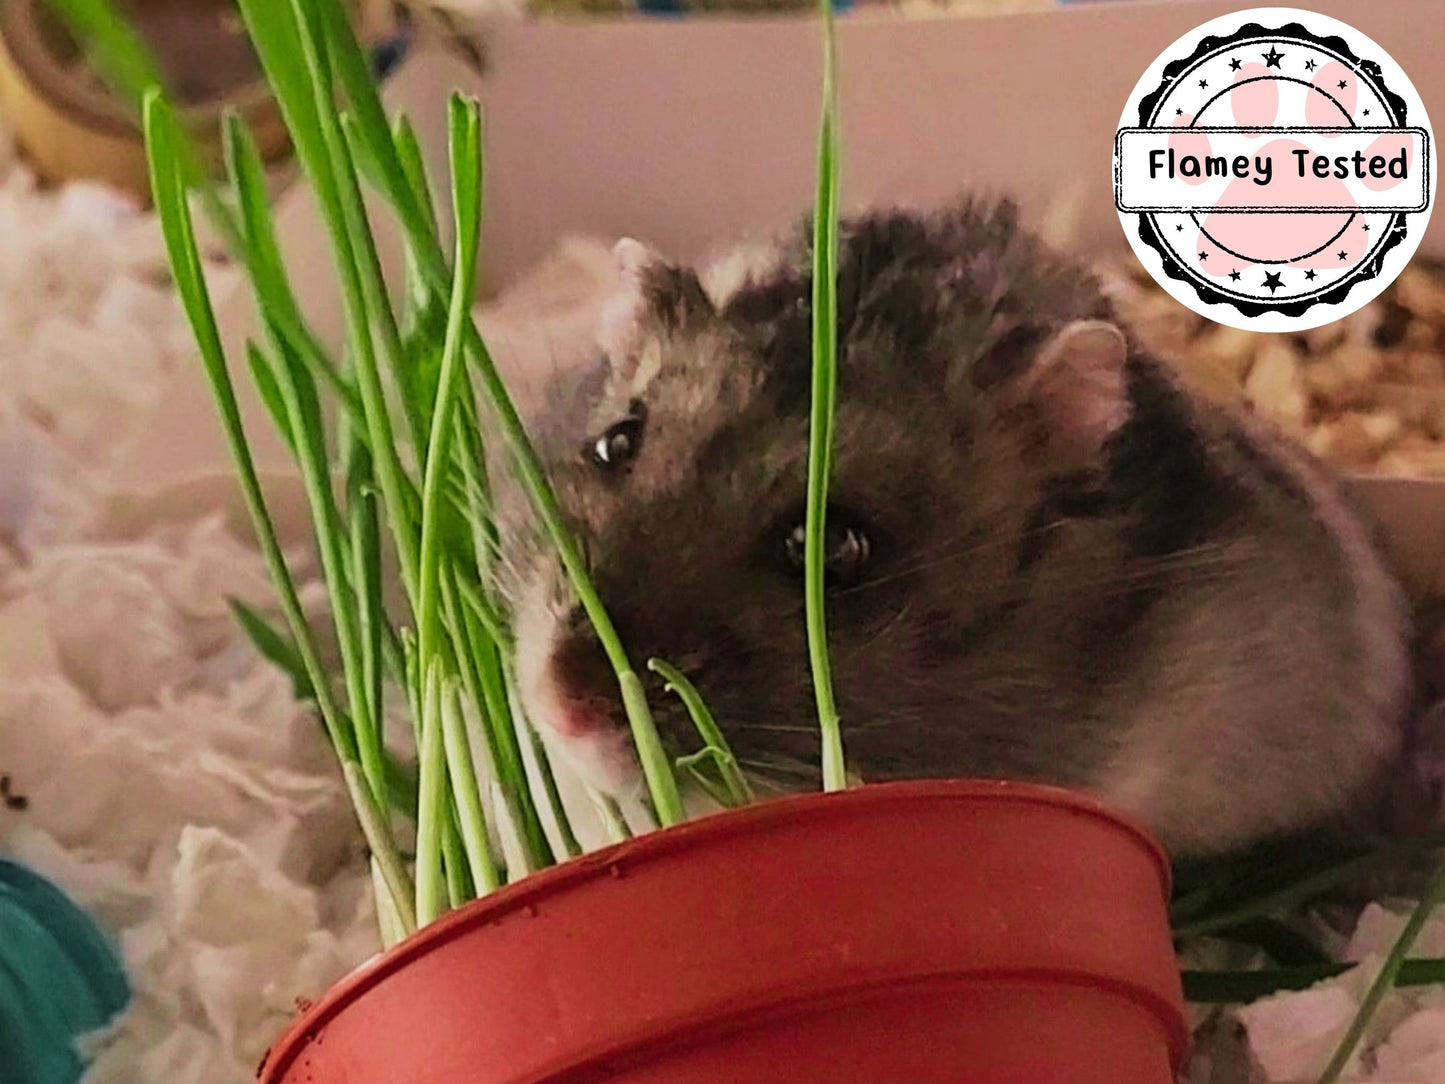 A picture of a hamster eating wheatgrass from a plastic plant pot